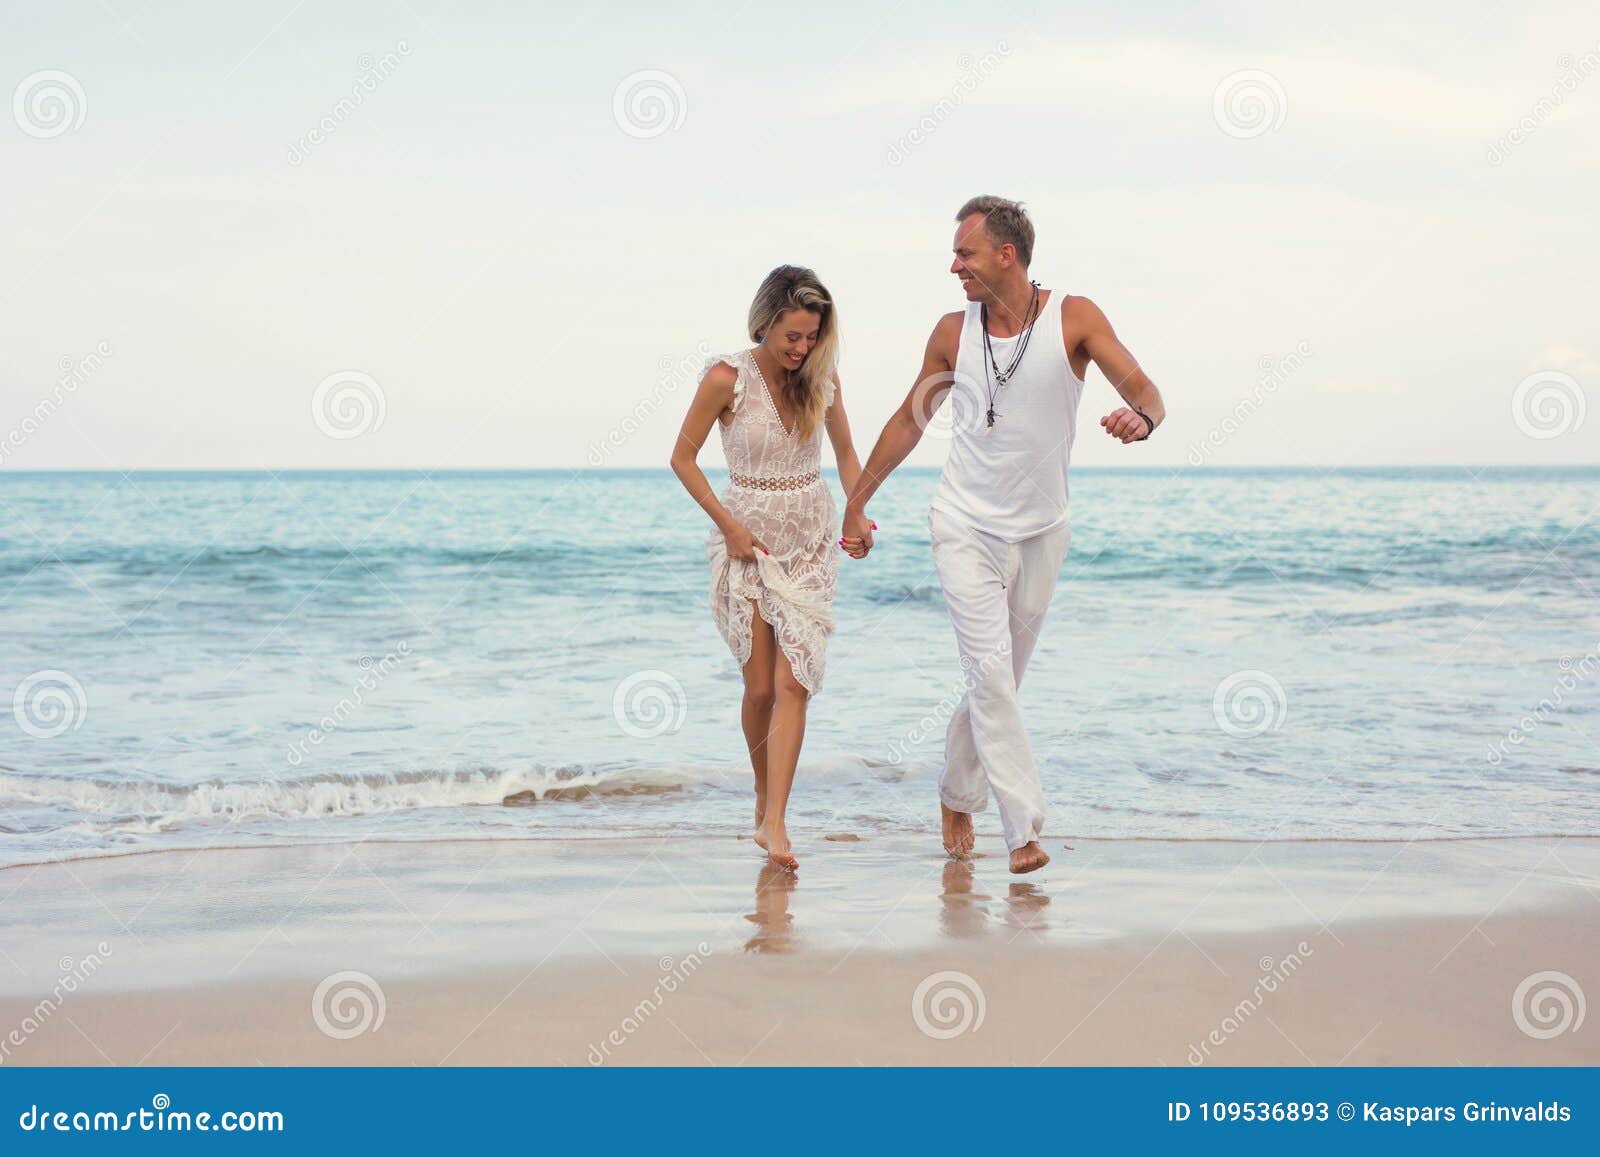 Cheerful Couple In Summer Clothes On The Beach Stock Image Image Of